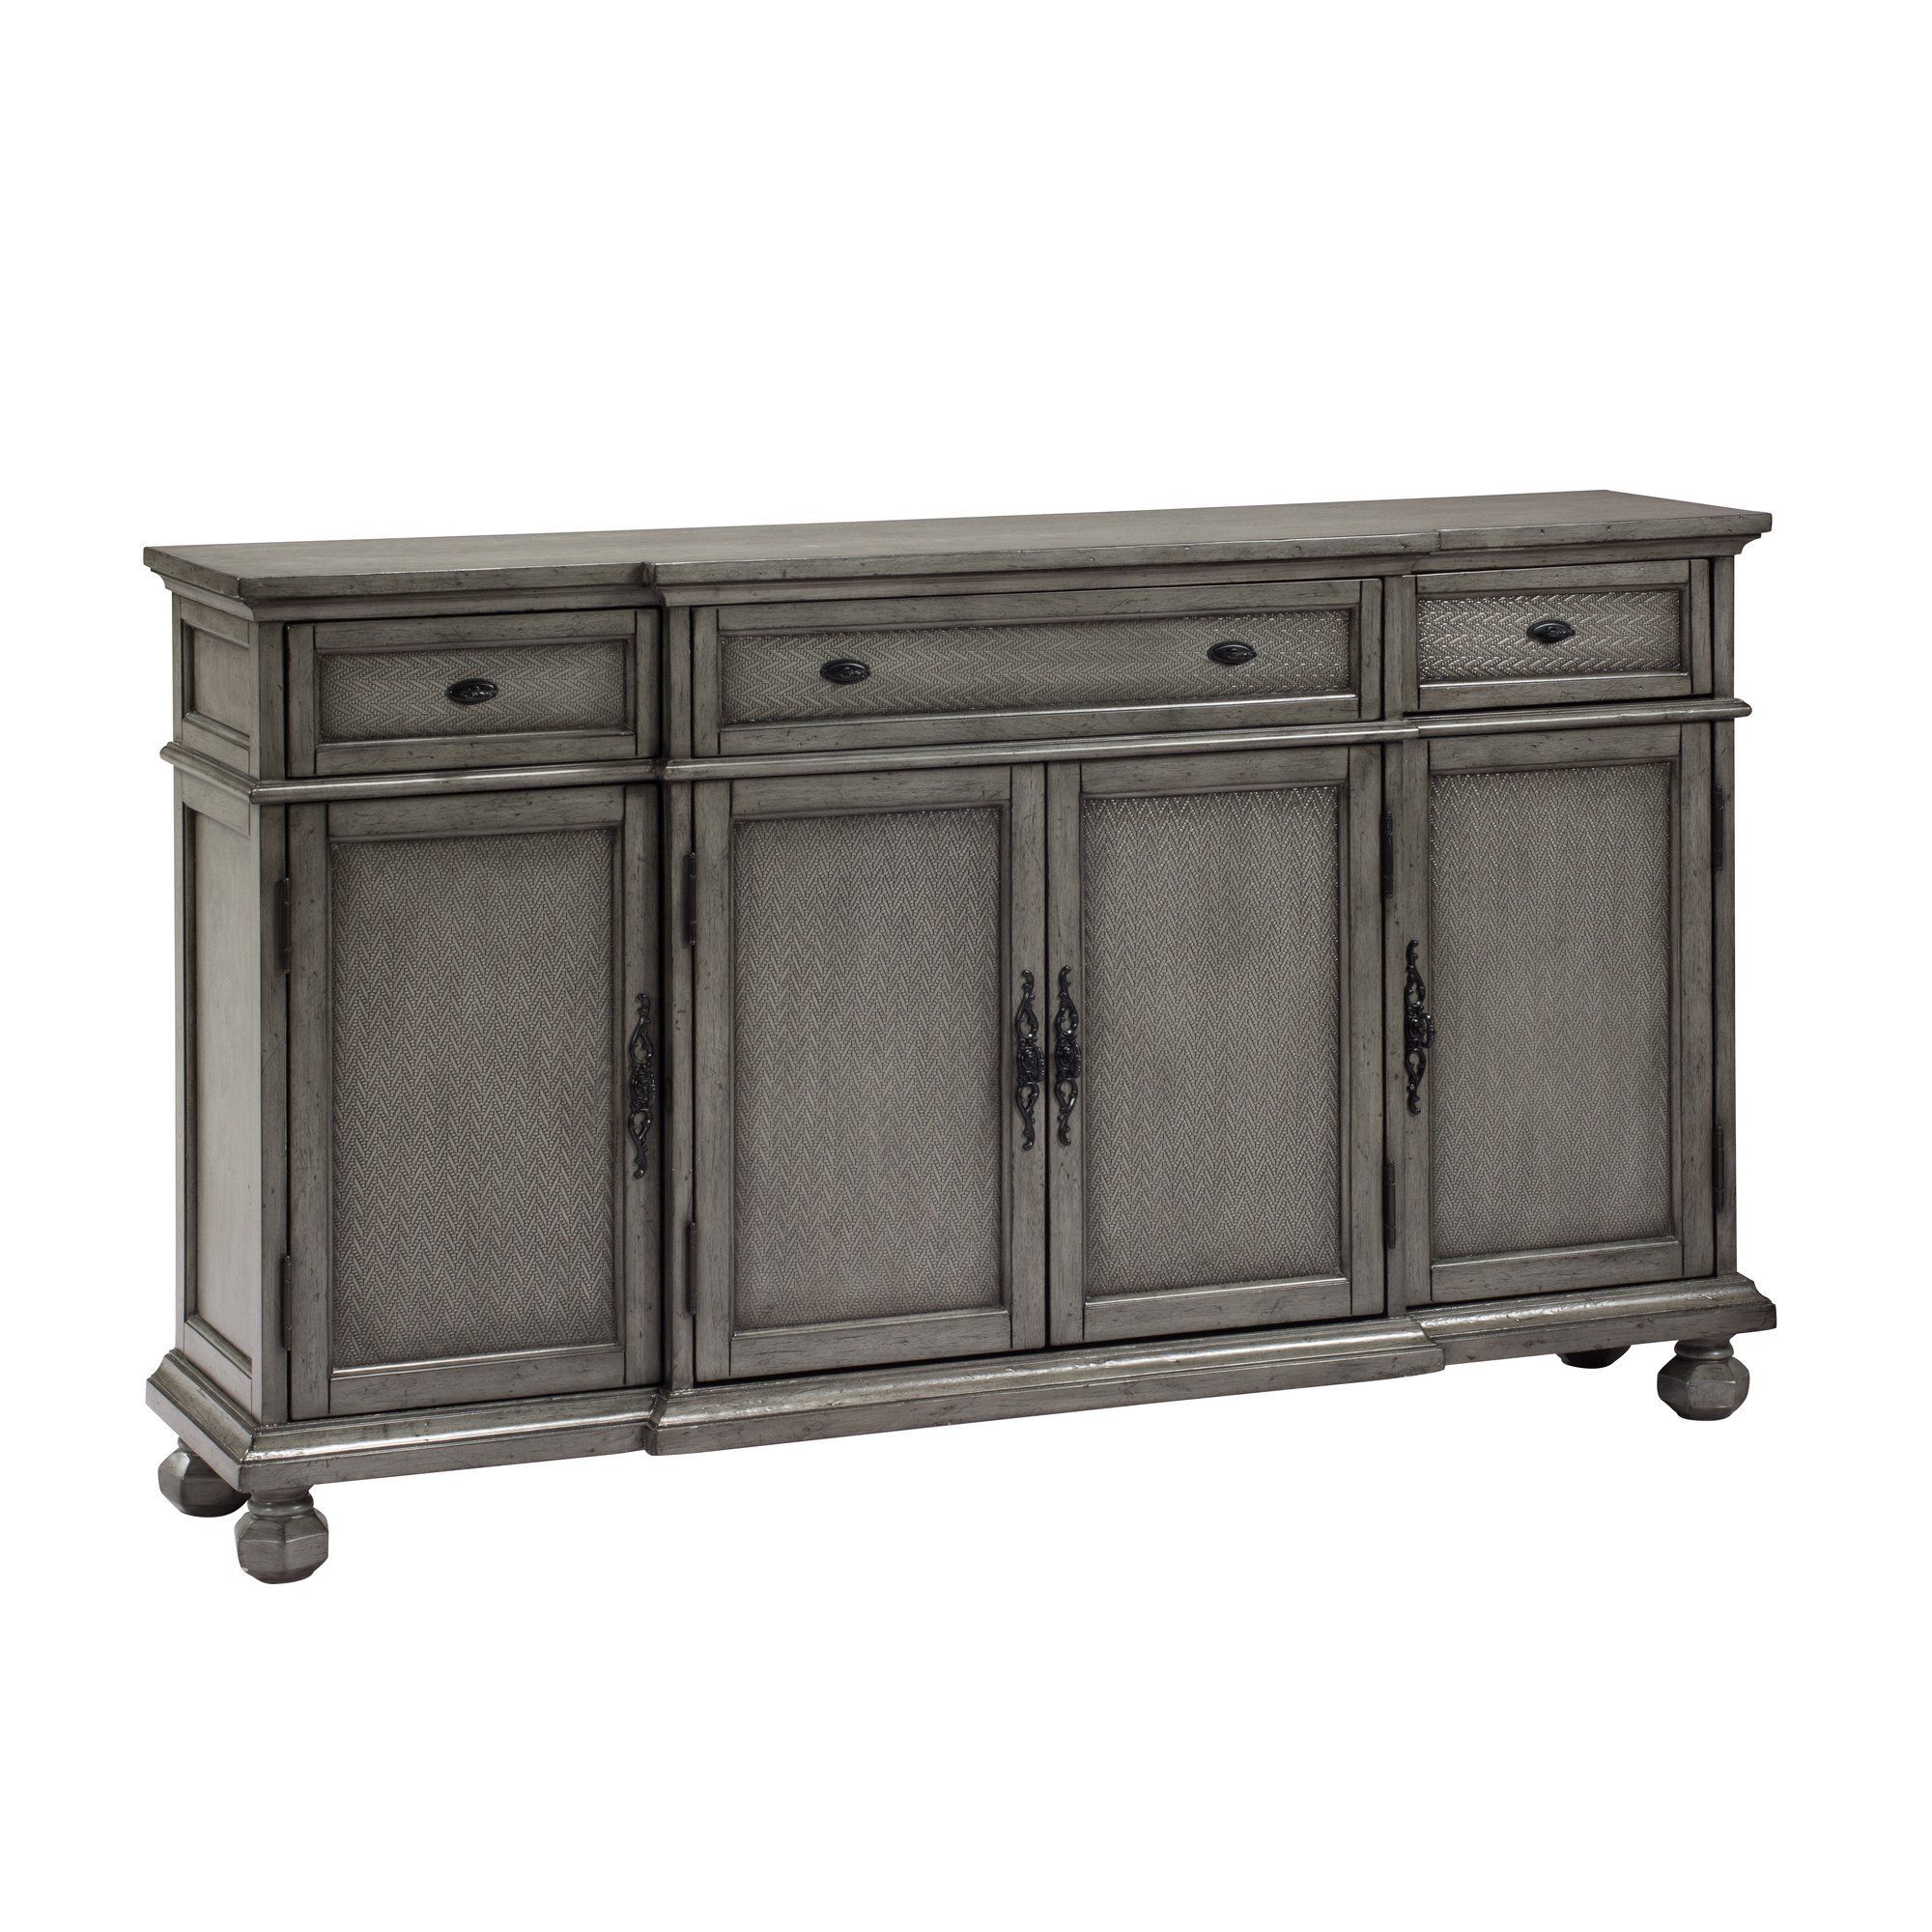 Rosecliff Heights Drummond 3 Drawer Sideboard | Products With Regard To Most Current Drummond 3 Drawer Sideboards (Photo 3 of 20)